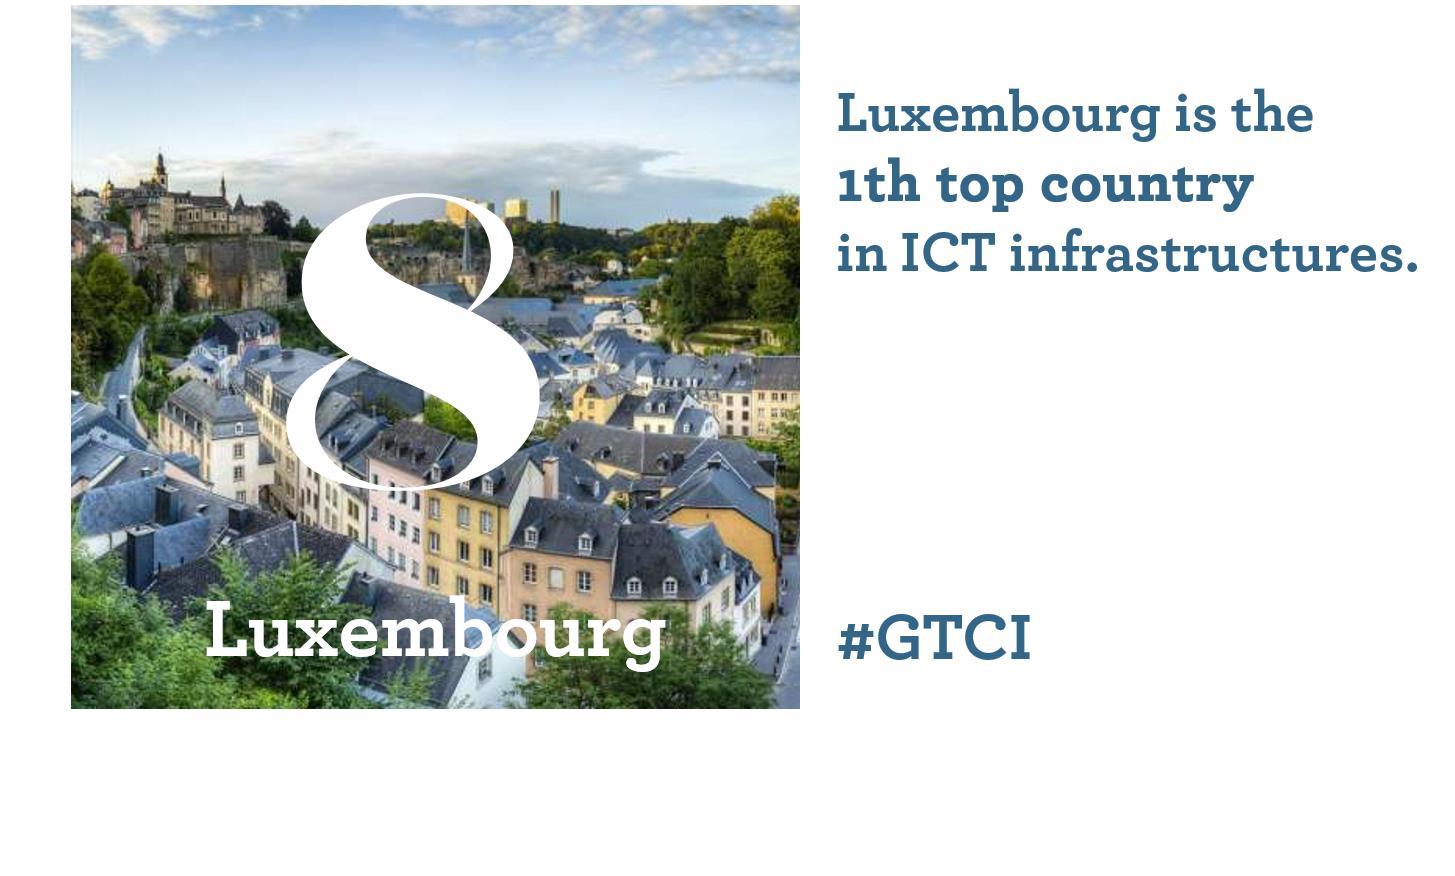 GTCI 2020 Luxembourg The Adecco Group Badenoch + Clark